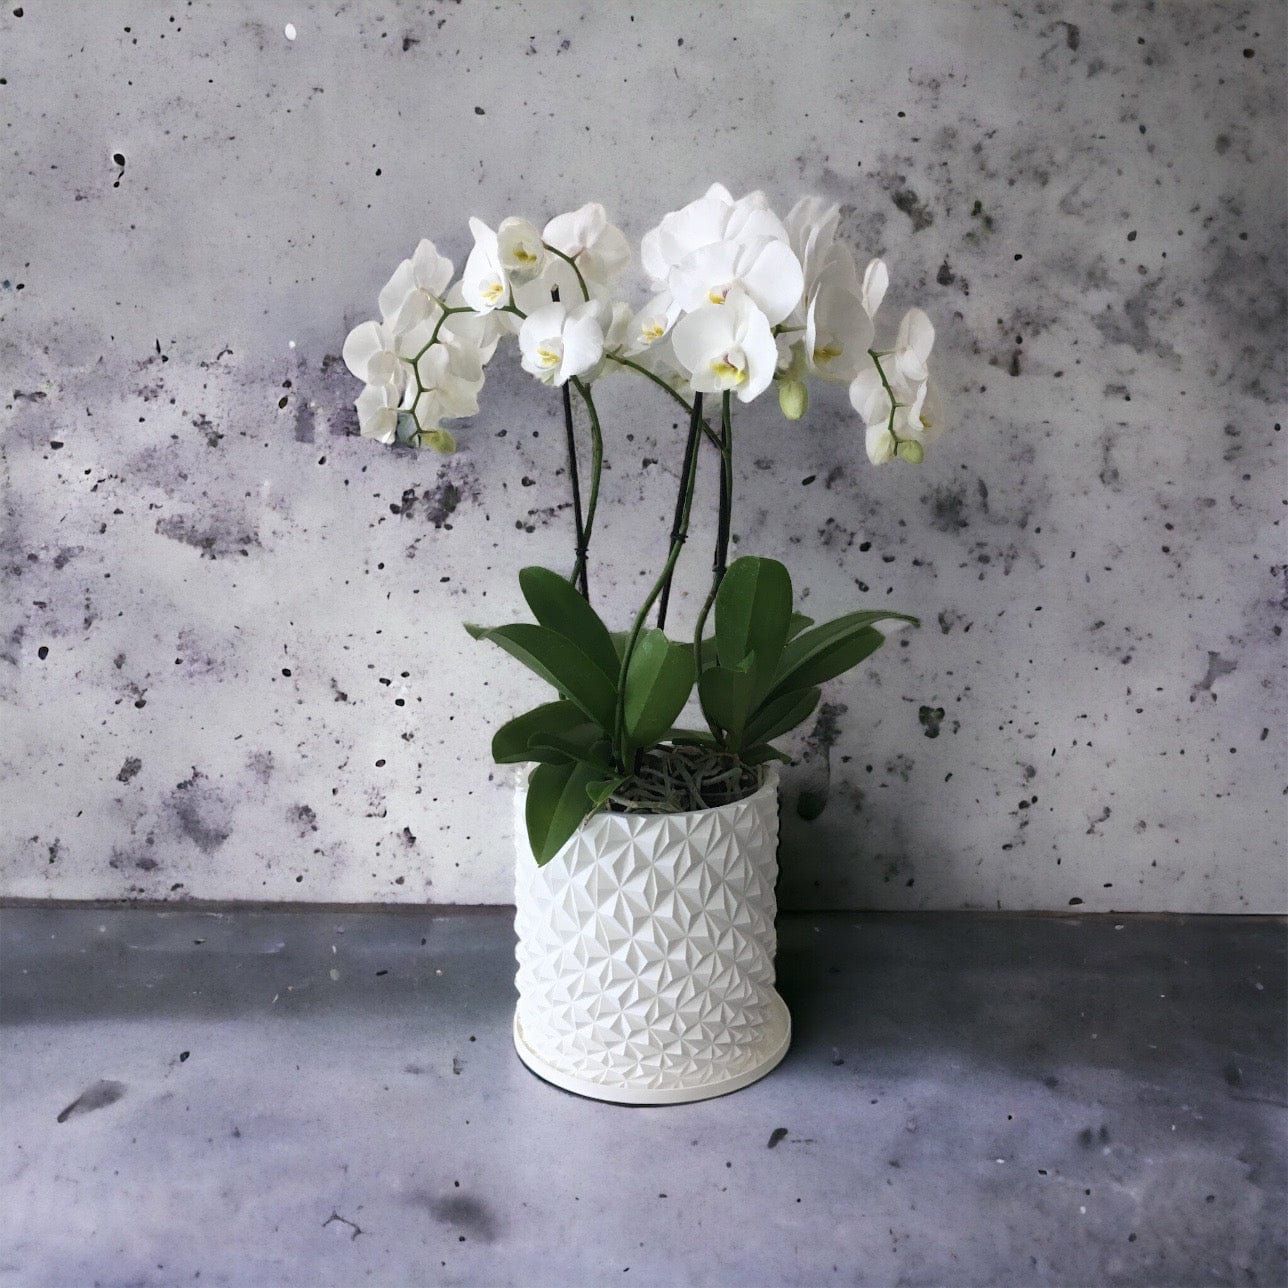 LOCALLY GROWN TRIPLE STEM WHITE PHALEONOPSIS ORCHID IN WHITE 3D PRINTED ECO PLANTER - 8" x 30"